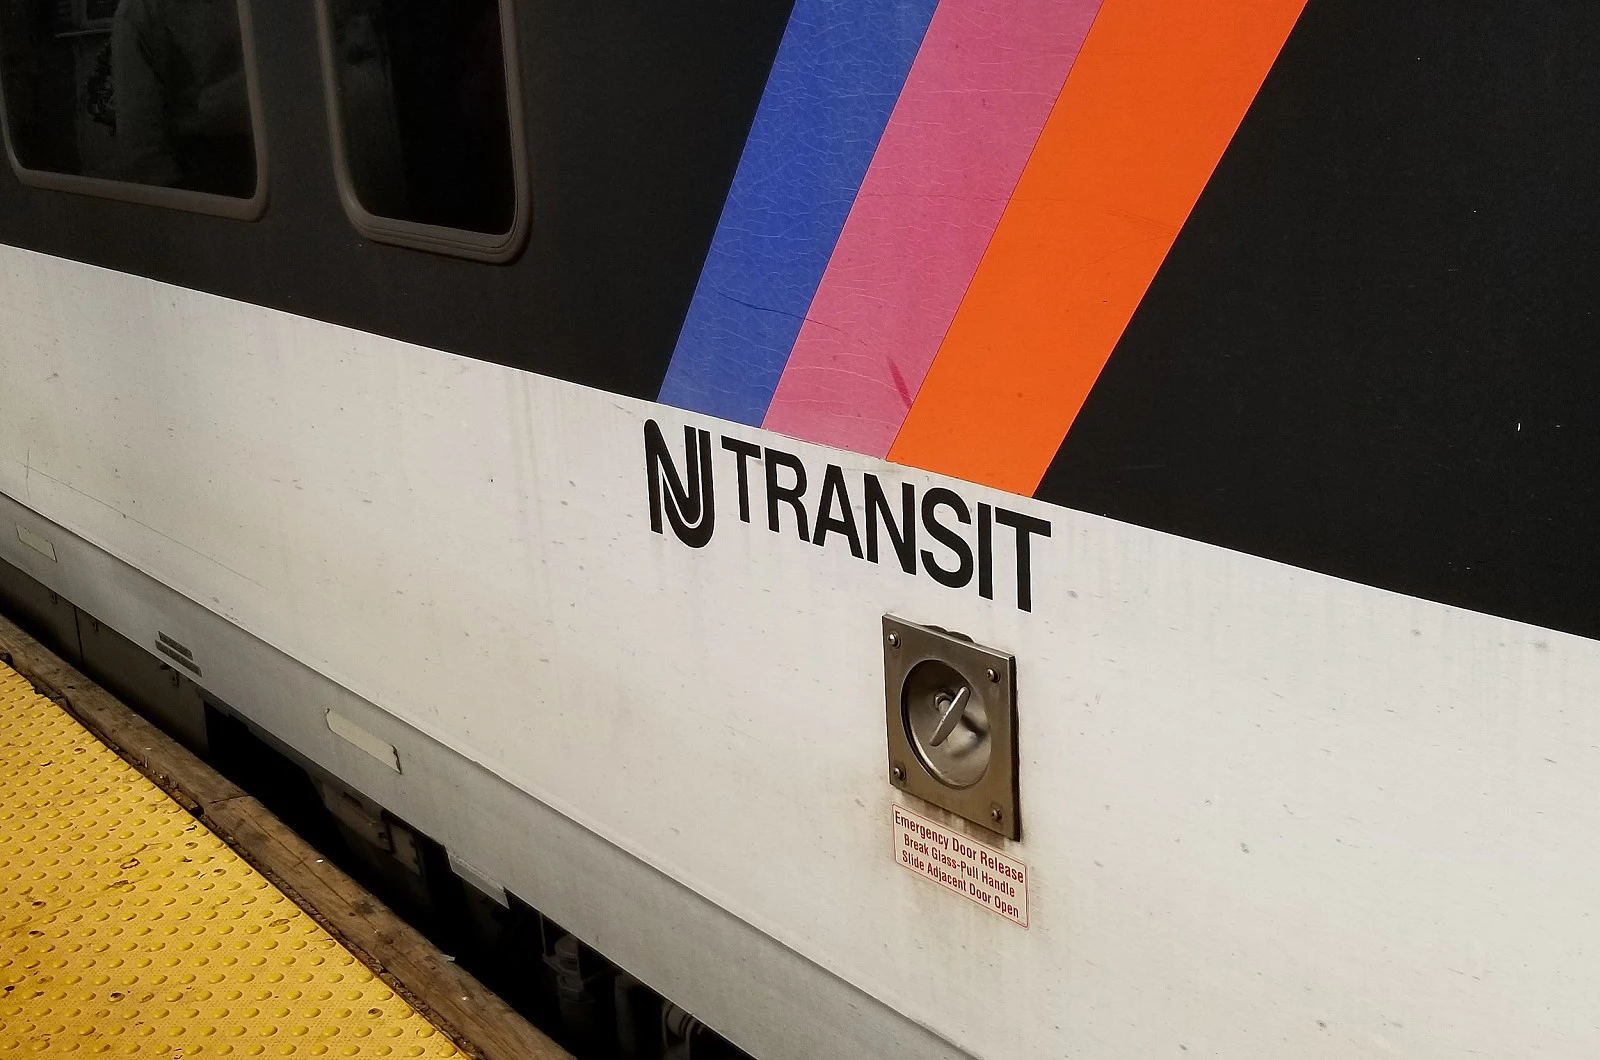 NJ Transit's issues refund policy for unused tickets, but there's a
catch